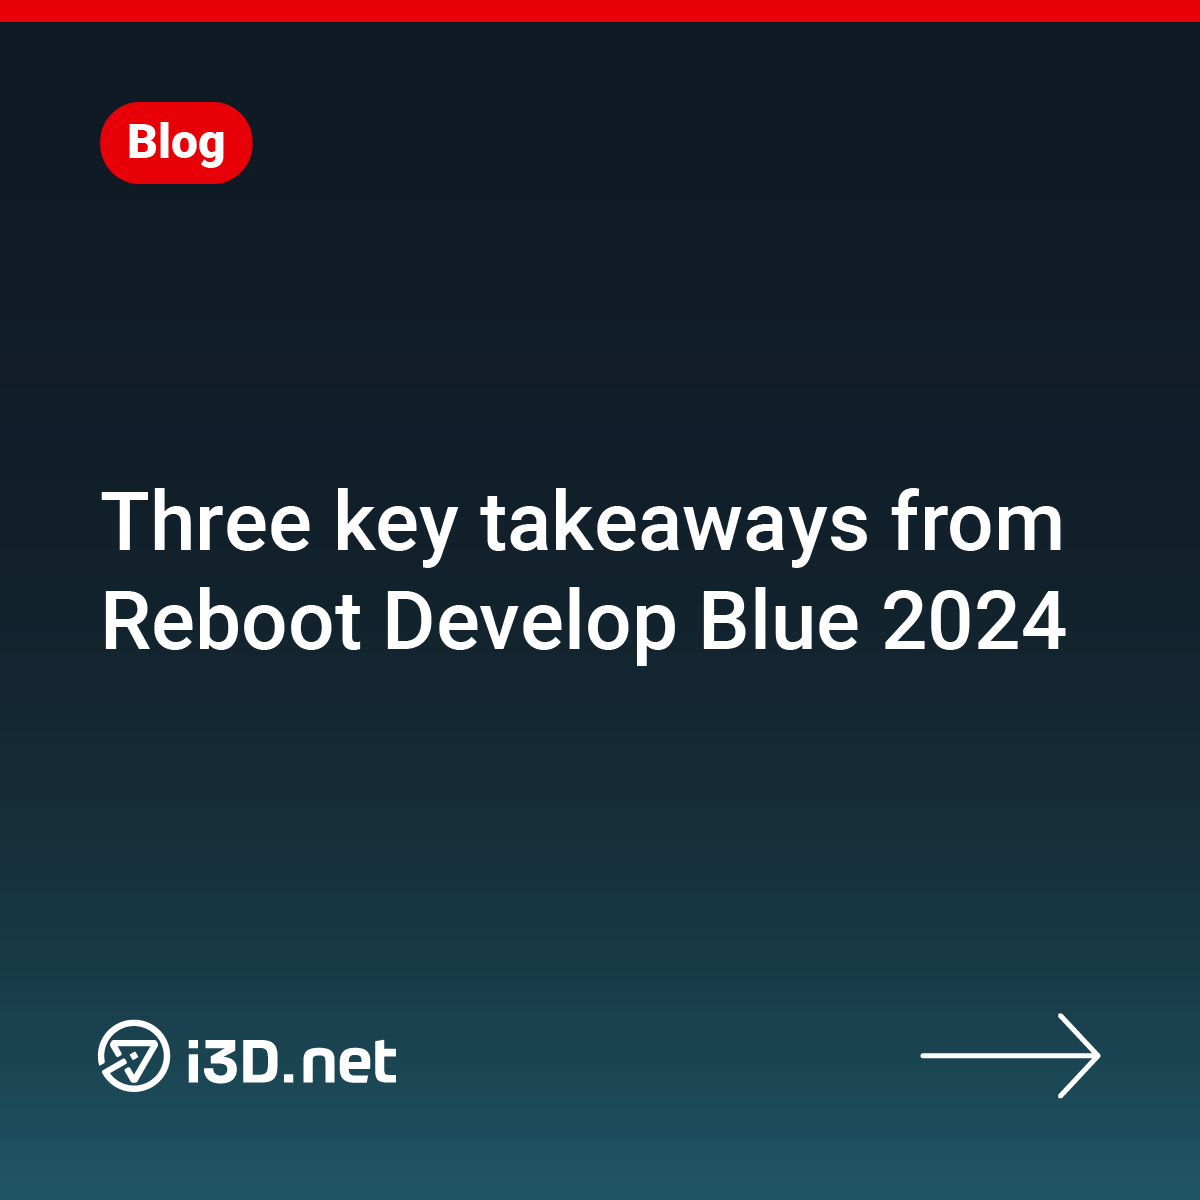 Last month, we powered up @RebootDevelop 2024. 💙

Our Product Marketing Manager, Jaunius Satkauskas, shared 3 key takeaways you need to see. 

Check them out here: bit.ly/4azjvqq 

#RebootDevelopBlue2024 #GamingIndustry #Gaming #GameHosting 💙🚀